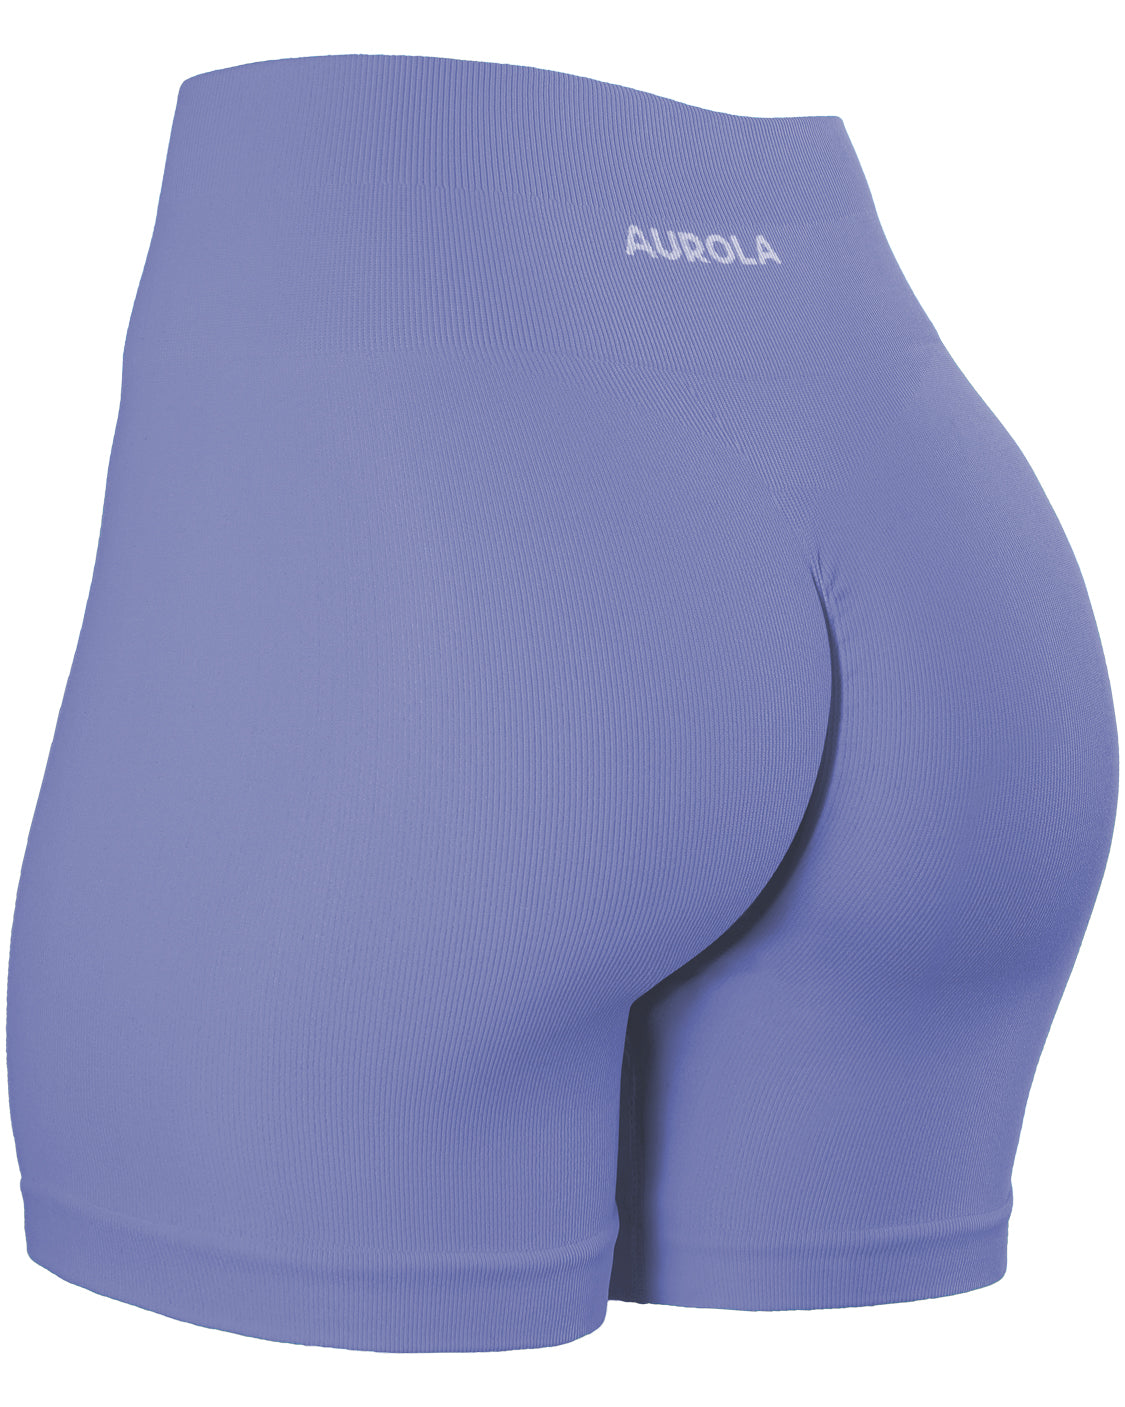 AUROLA Seamless Scrunch Black Booty Shorts For Women Perfect For Gym, Yoga,  Running, And Active Exercise From T_shirt_x, $19.87